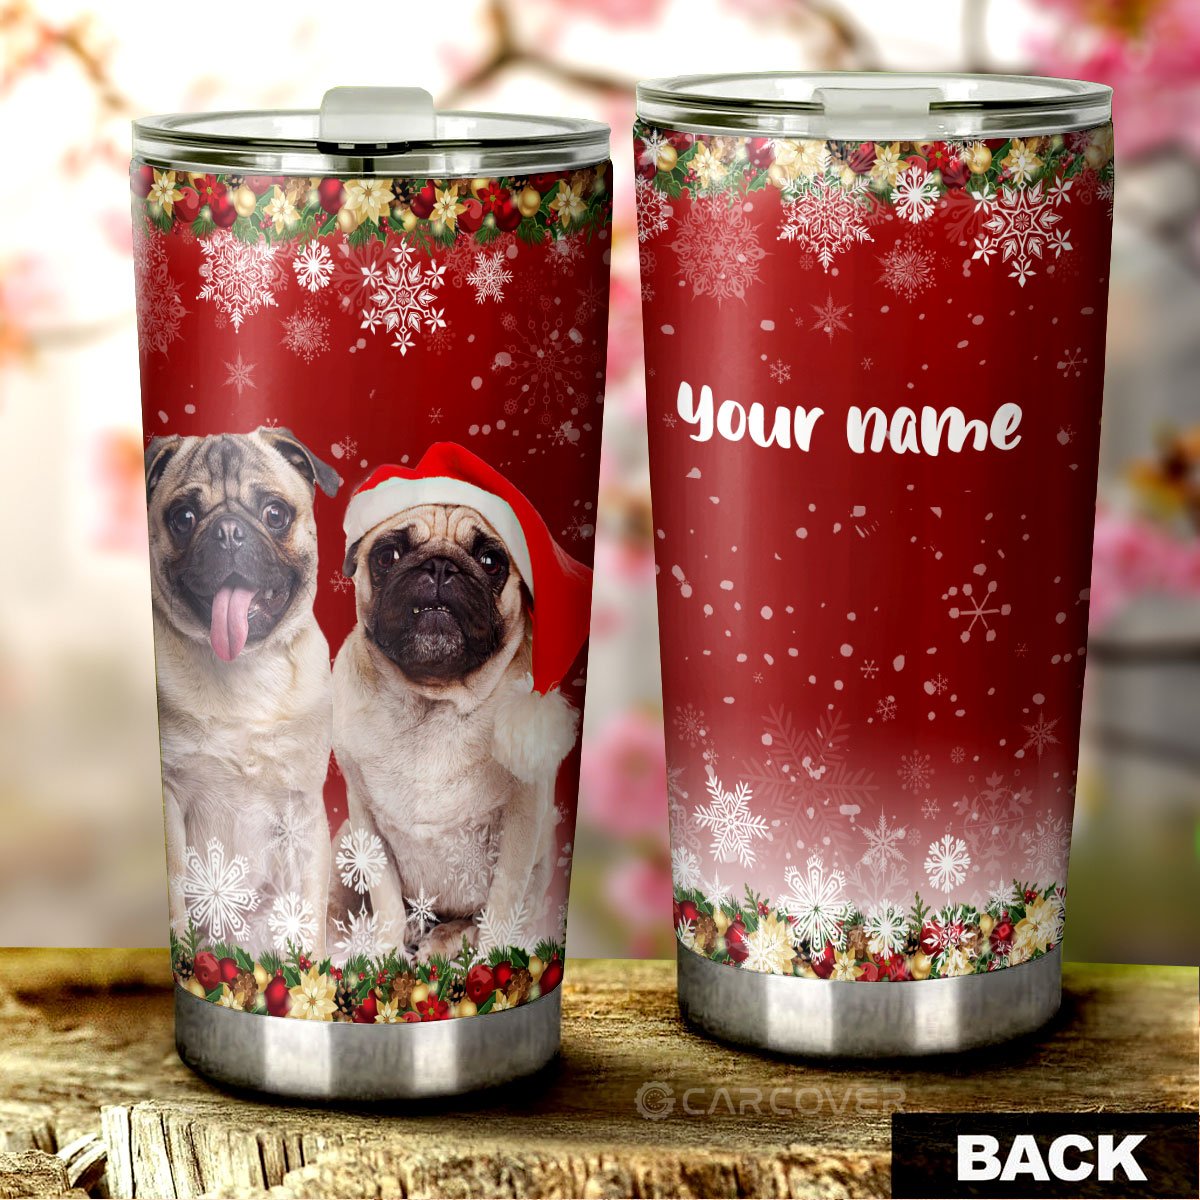 Christmas Pugs Tumbler Cup Custom Car Interior Accessories - Gearcarcover - 1